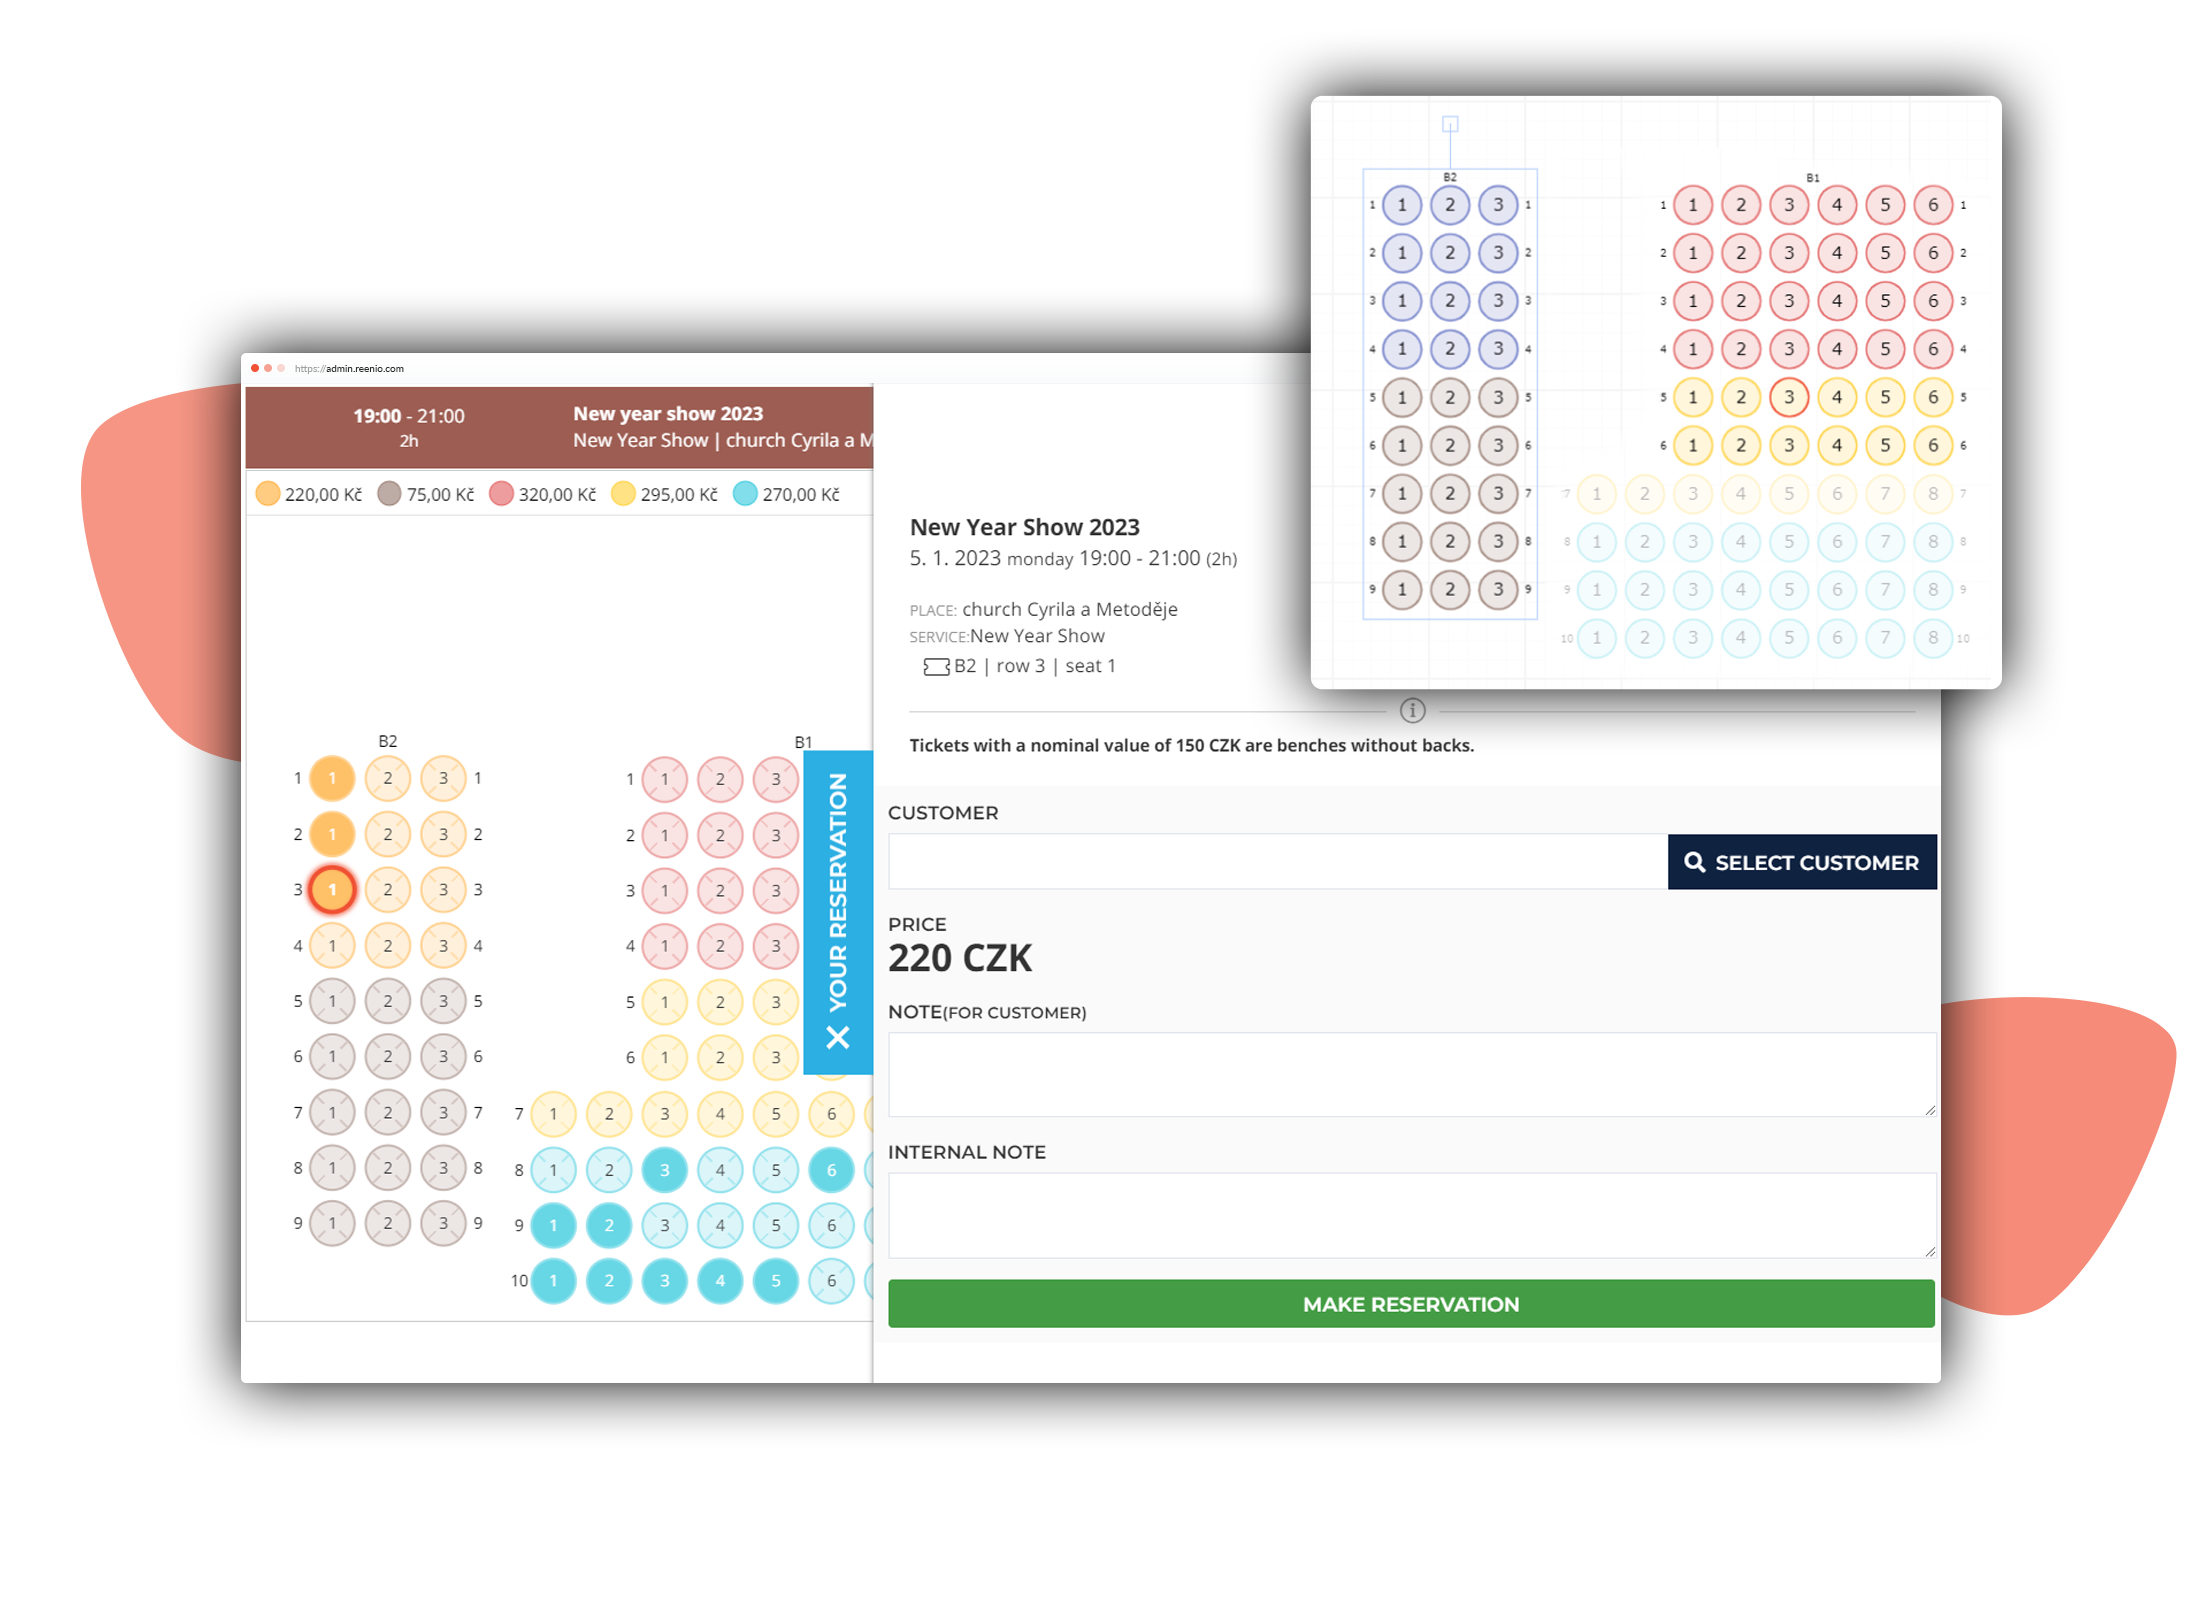 Seat map for booking specific seats